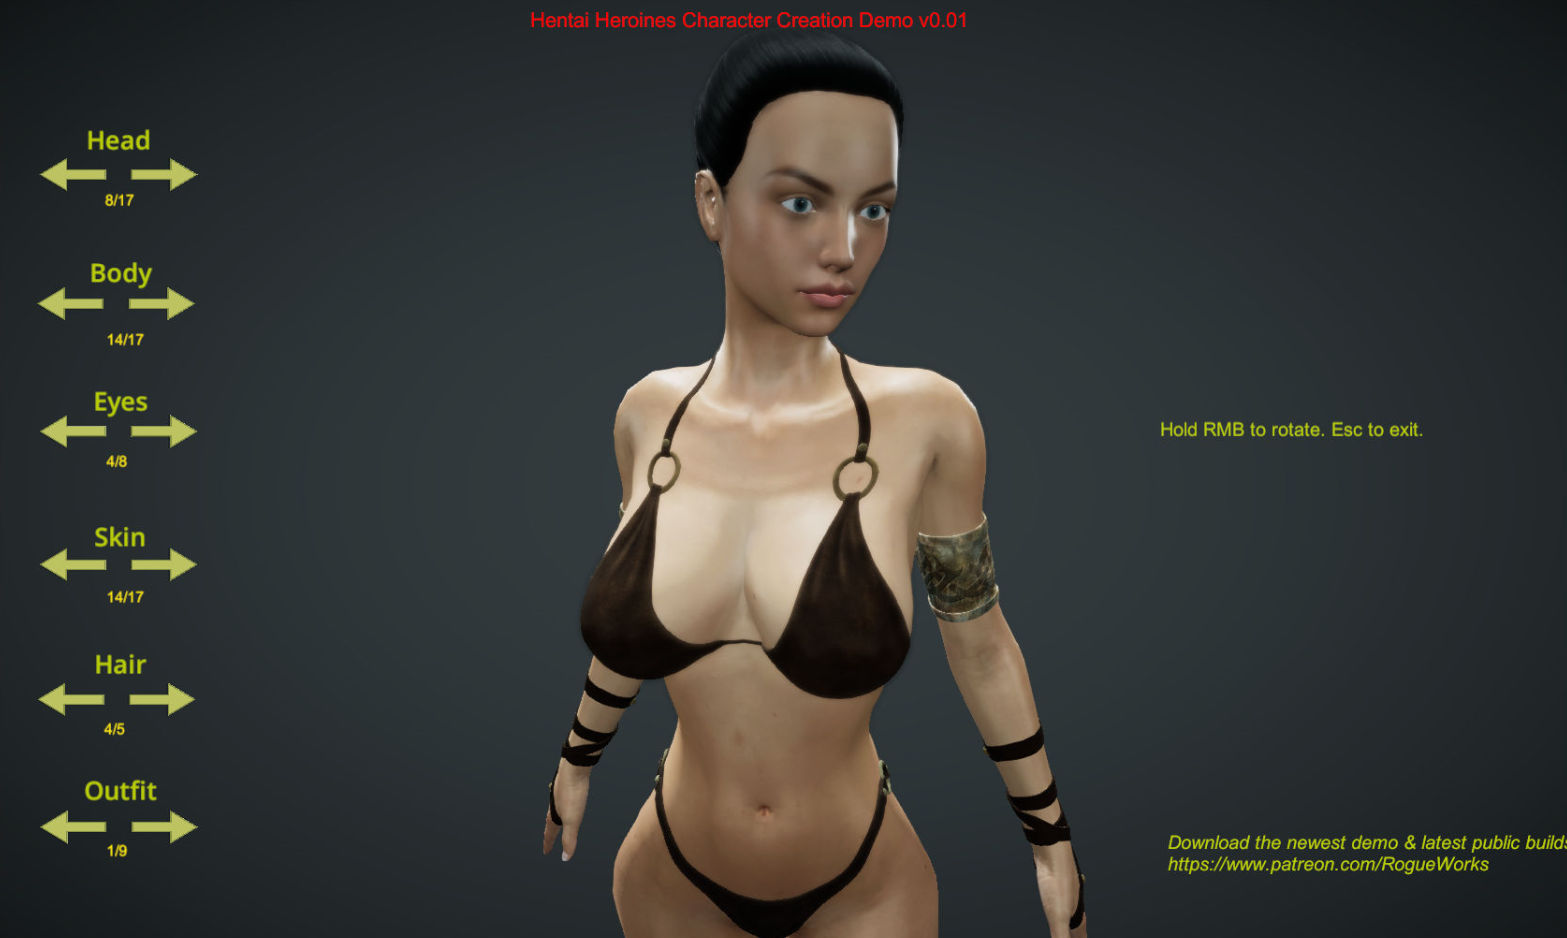 Hentai Heroines Character Creation Demo v0.1 from RogueWorks Porn Game